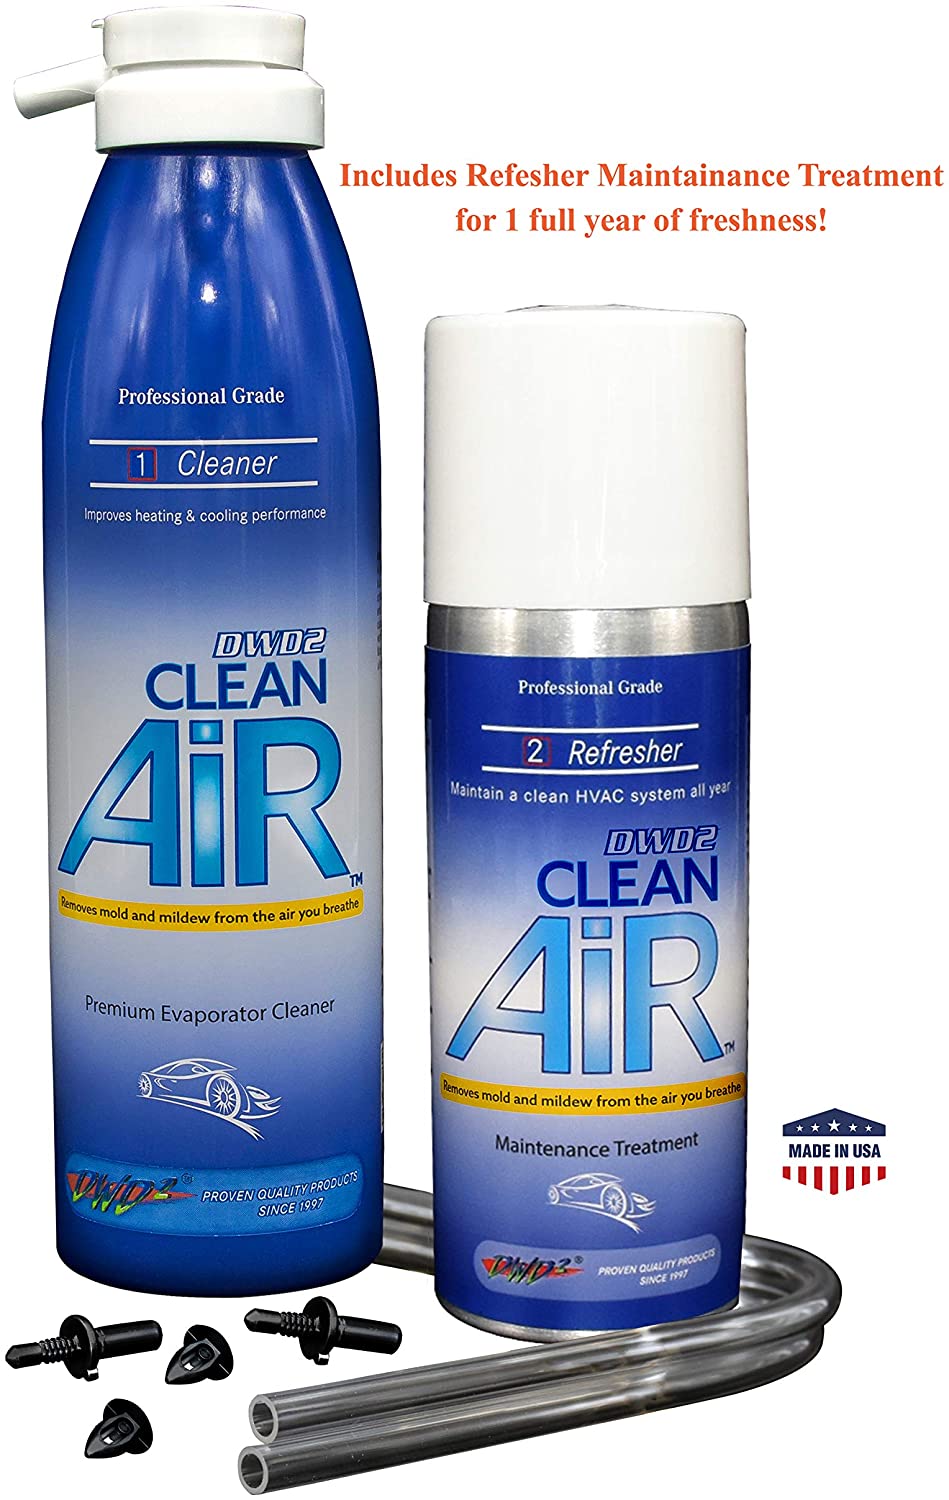 DWD2 Clean AIR AC Evaporator Coil Cleaner & Refresher